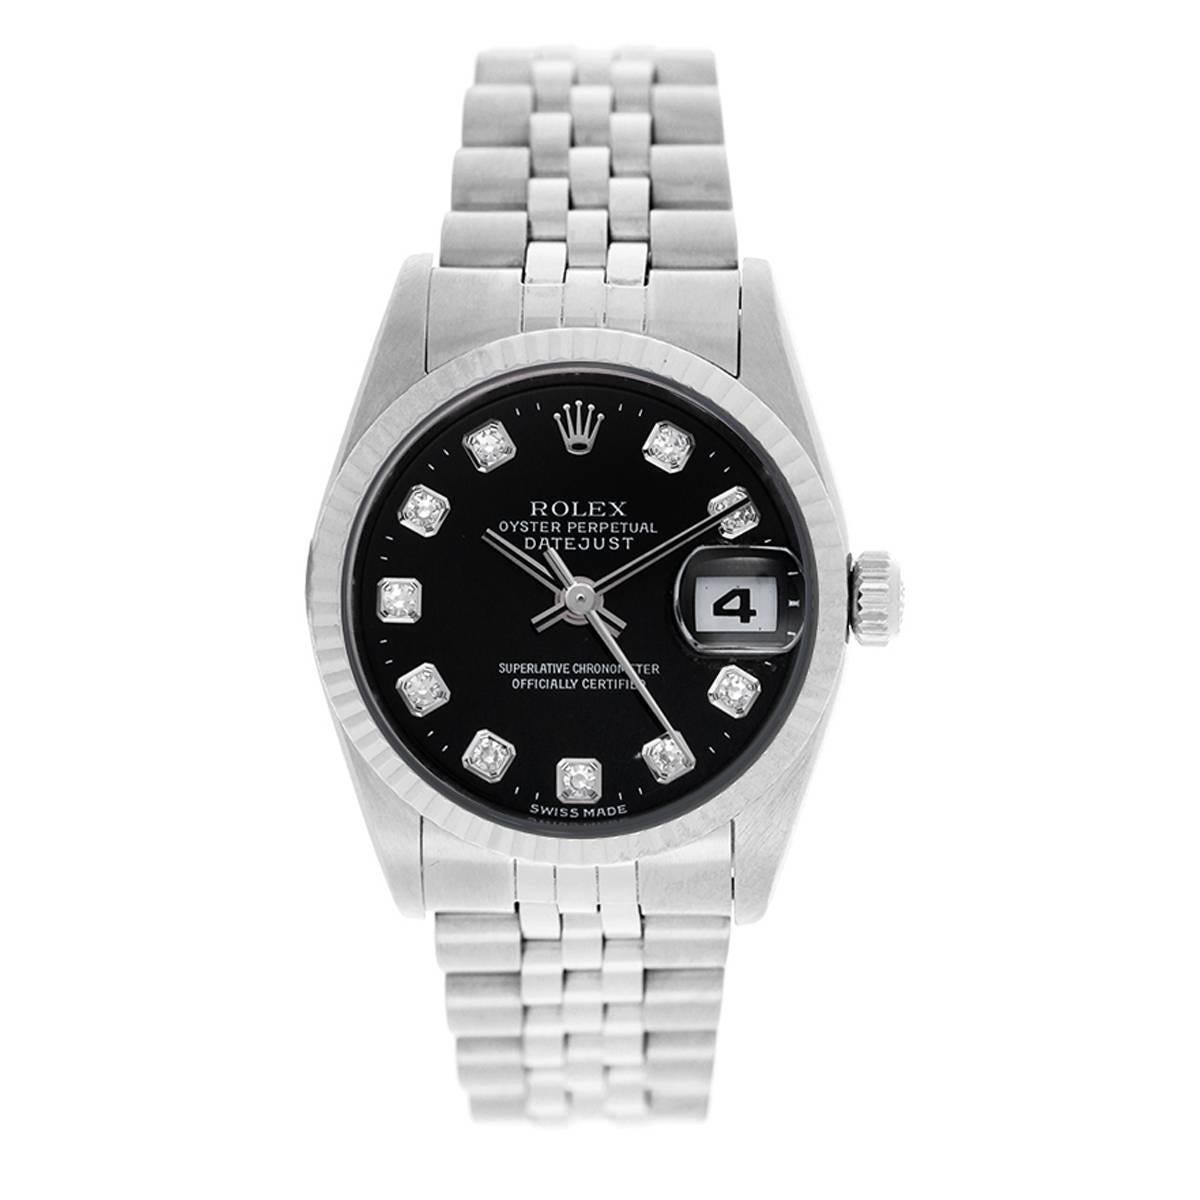 Rolex Stainless Steel Midsize Datejust Black Dial Automatic Wristwatch